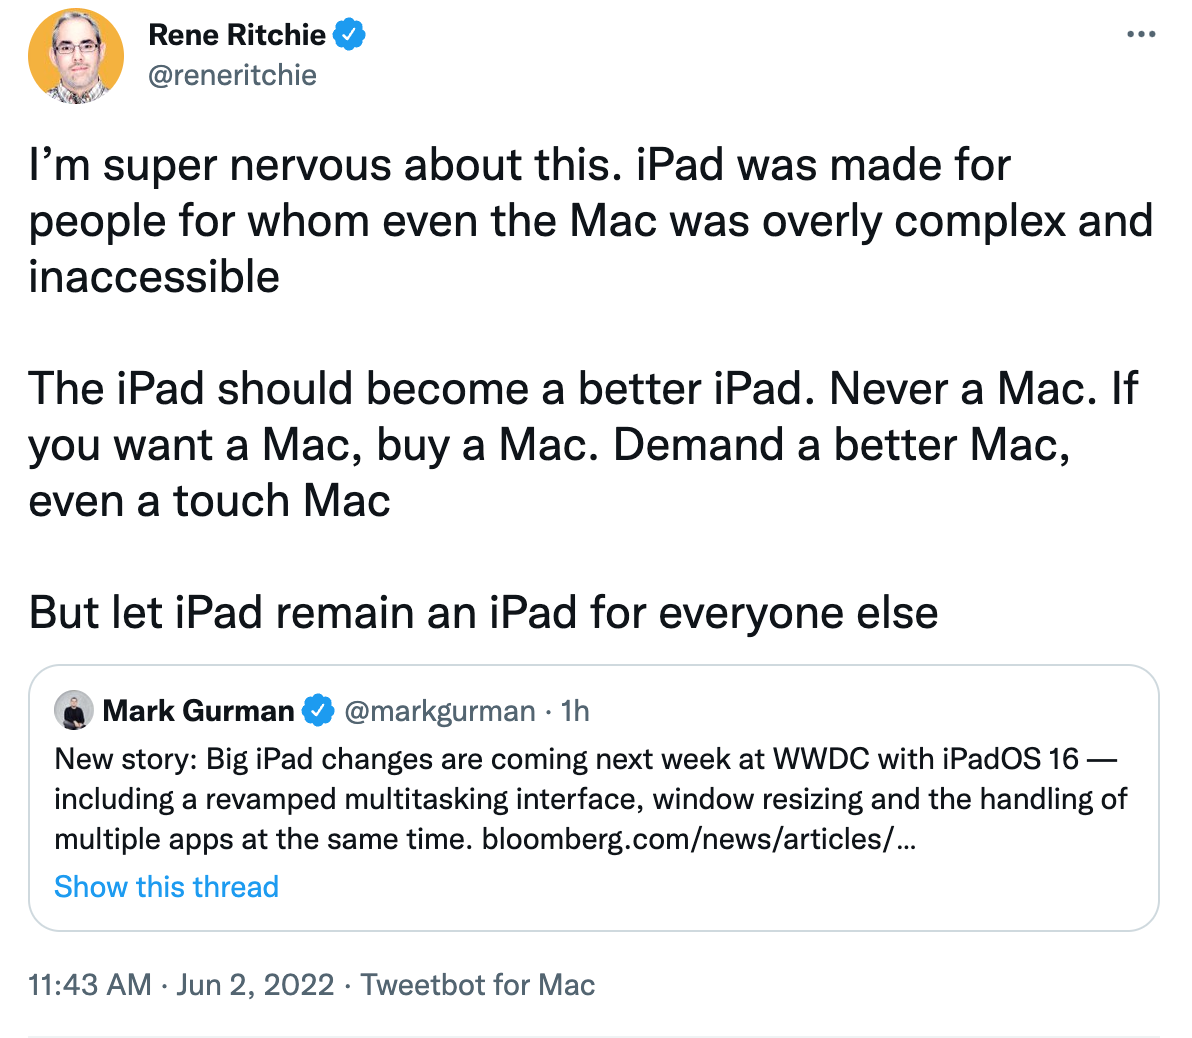 I’m super nervous about this. iPad was made for people for whom even the Mac was overly complex and inaccessible   The iPad should become a better iPad. Never a Mac. If you want a Mac, buy a Mac. Demand a better Mac, even a touch Mac  But let iPad remain an iPad for everyone else